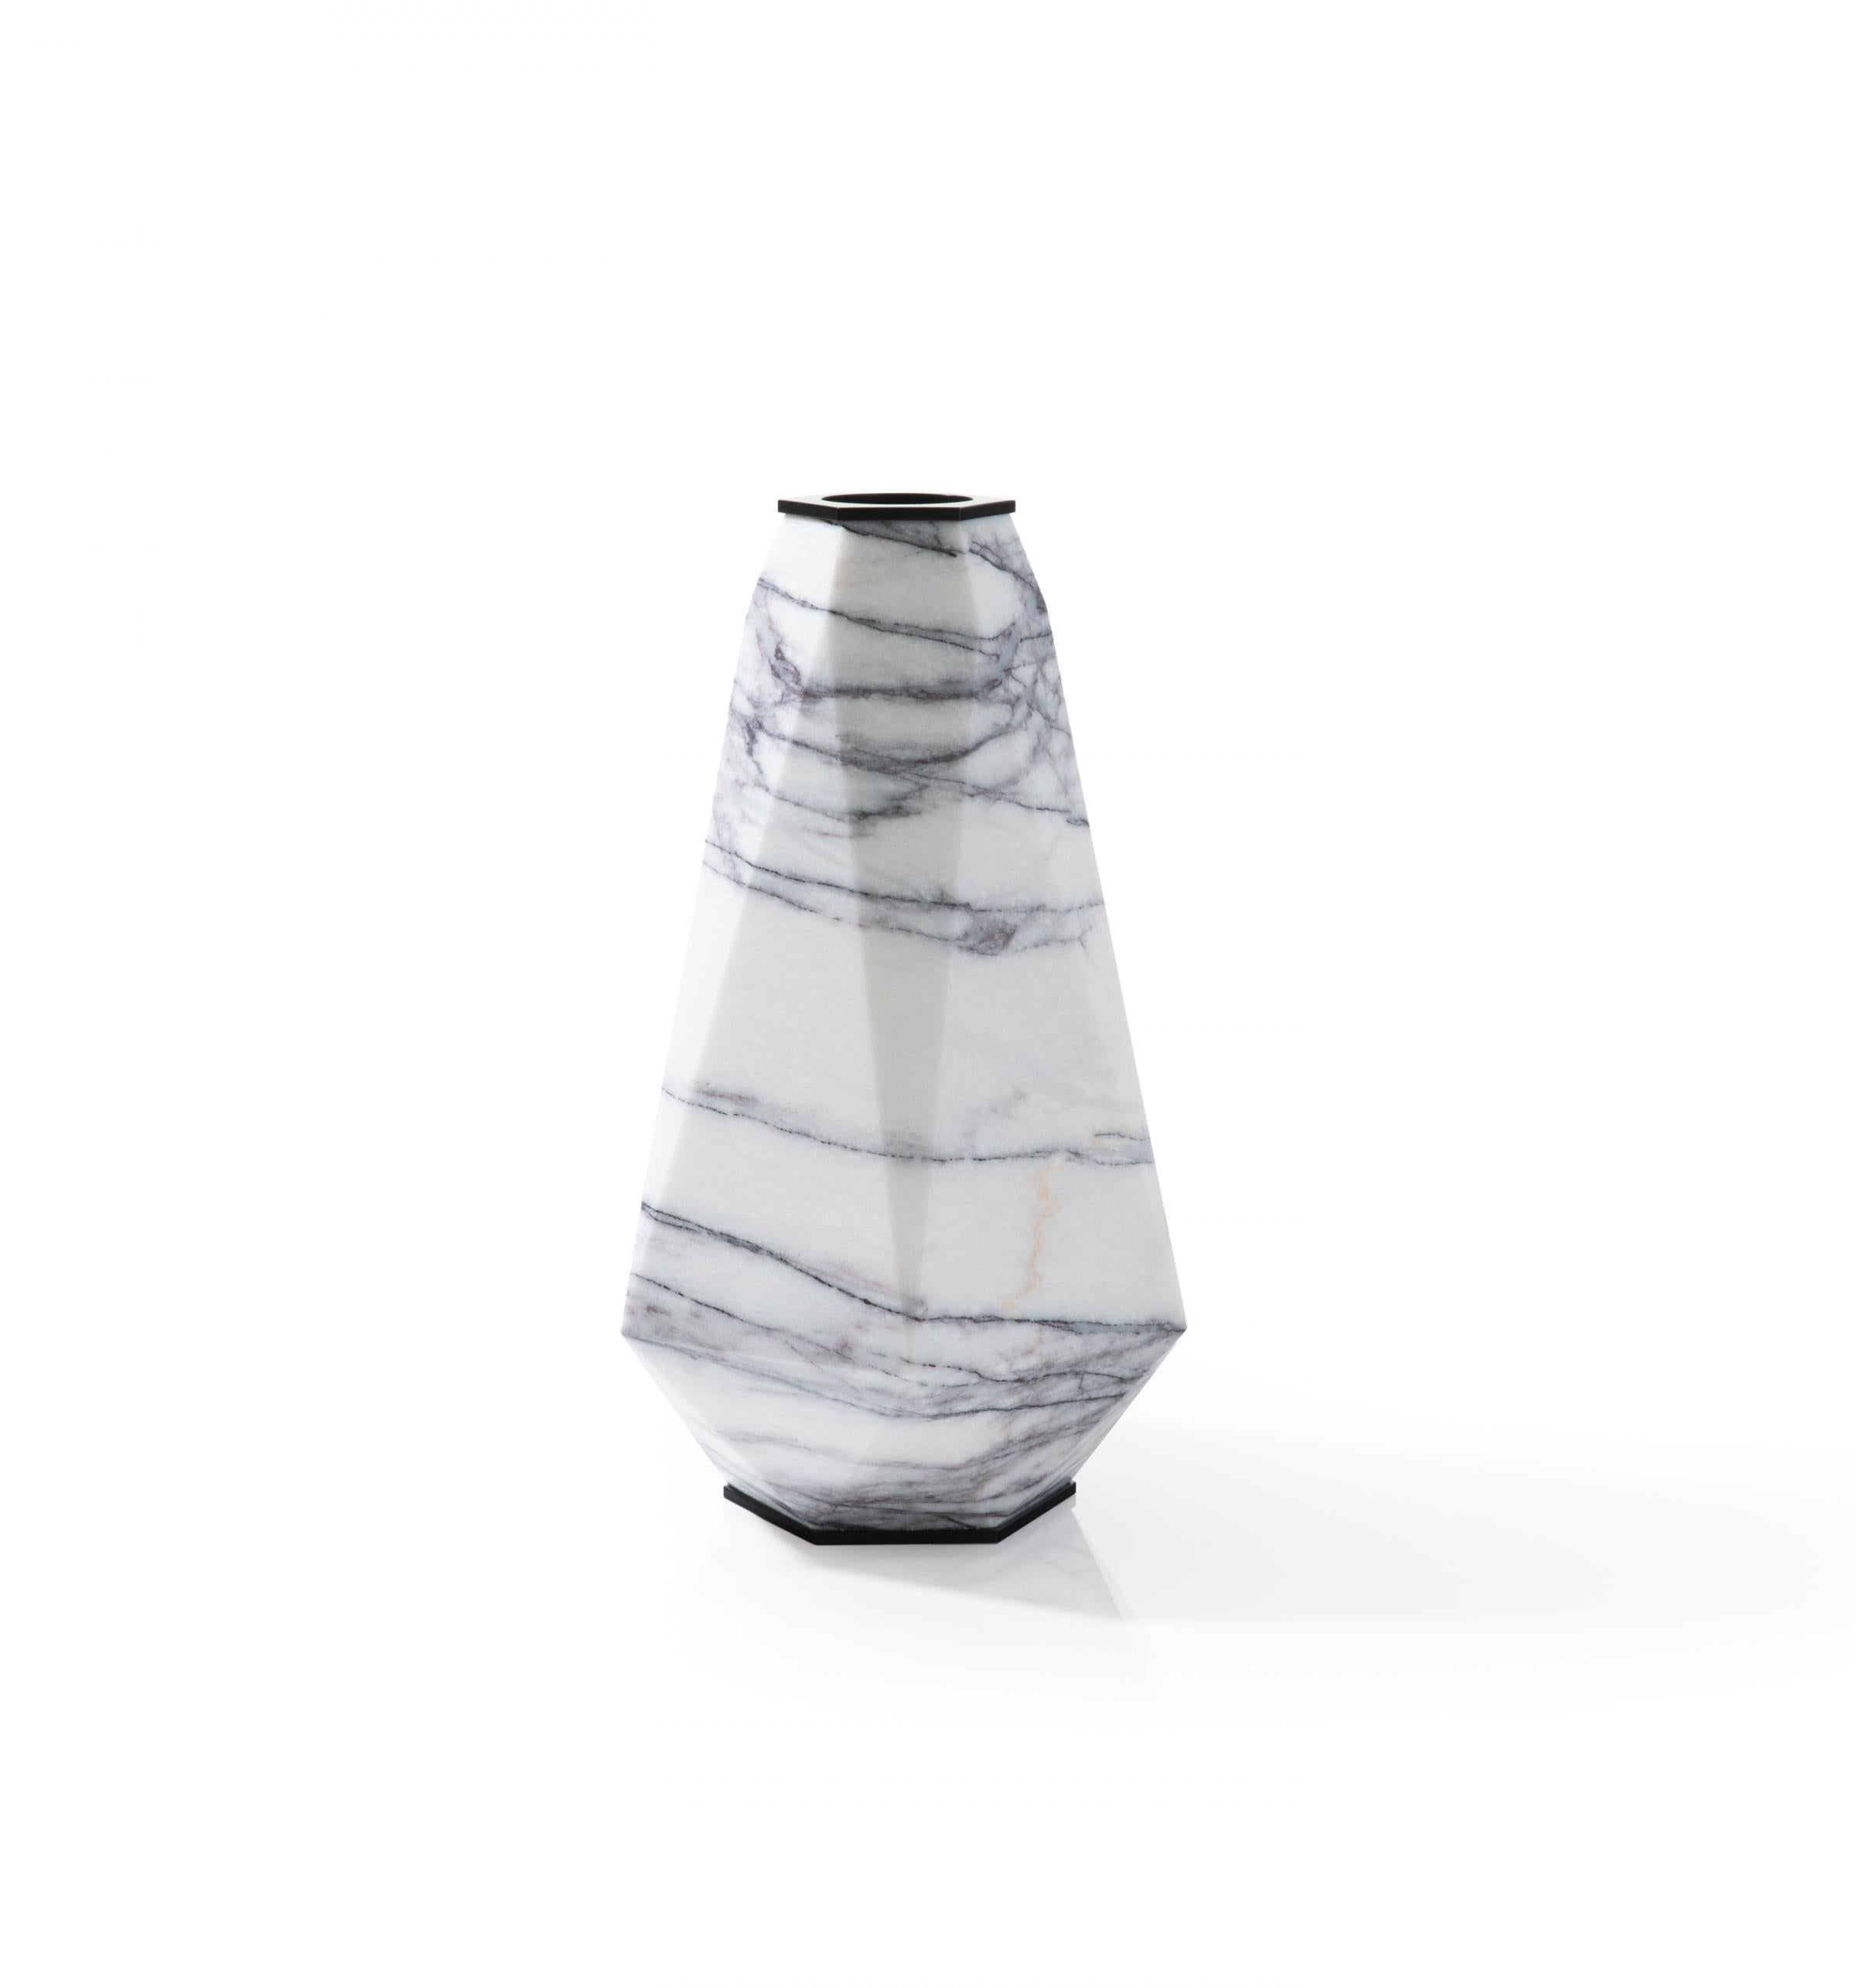 Holly Hunt Warrior large slovenia marble & stainless steel vase by Eva Fehren

Additional Information:
Material: Slovenia marble and stainless steel
Finish: Lilac marble with black stainless steel
Dimensions: Ø 9.75 x 15 H inch
Available in